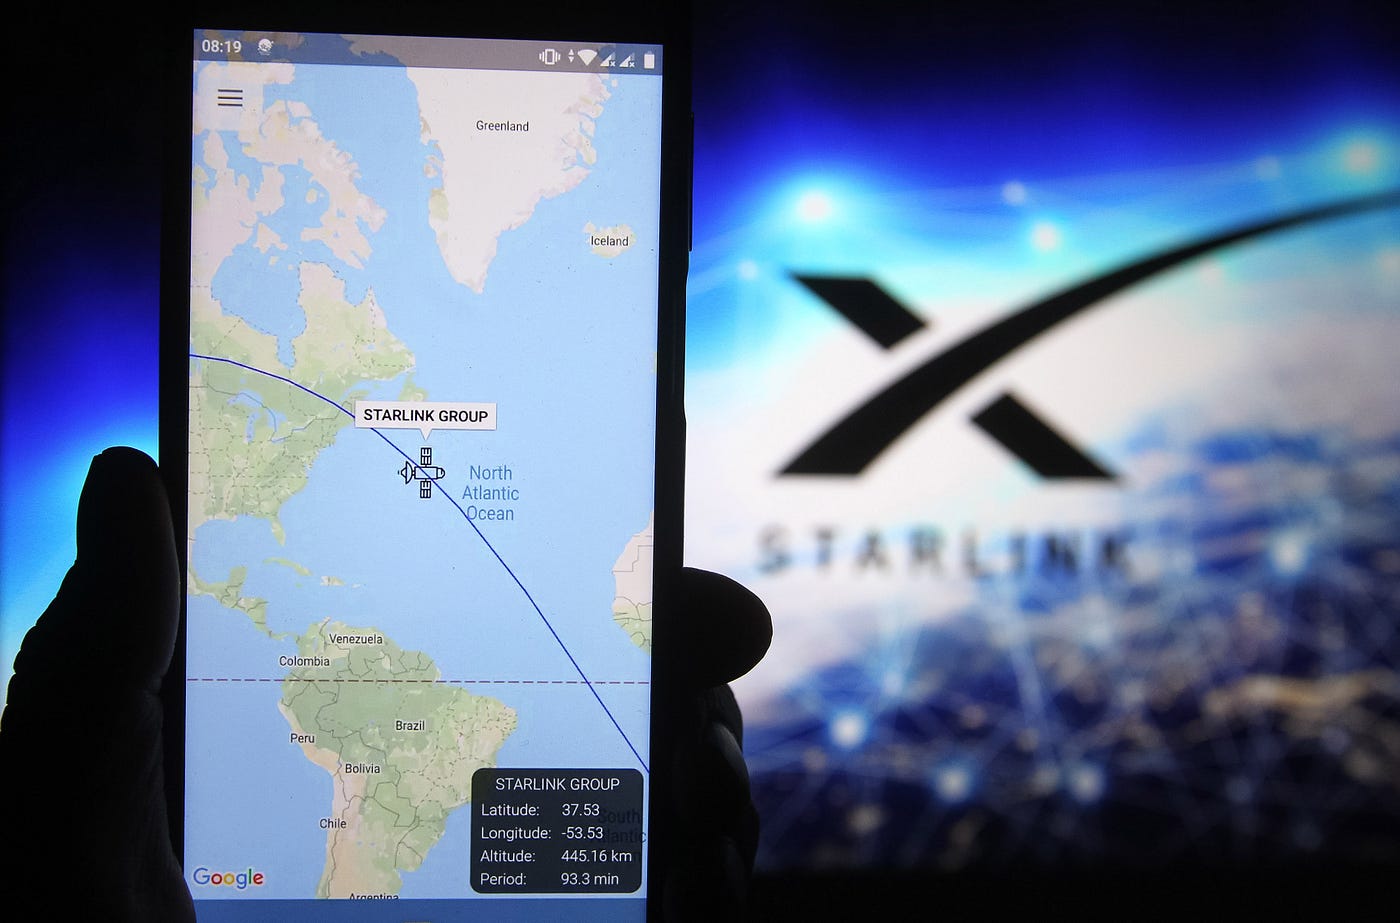 Starlink unveils airplane service—Musk says it's like using Internet at  home